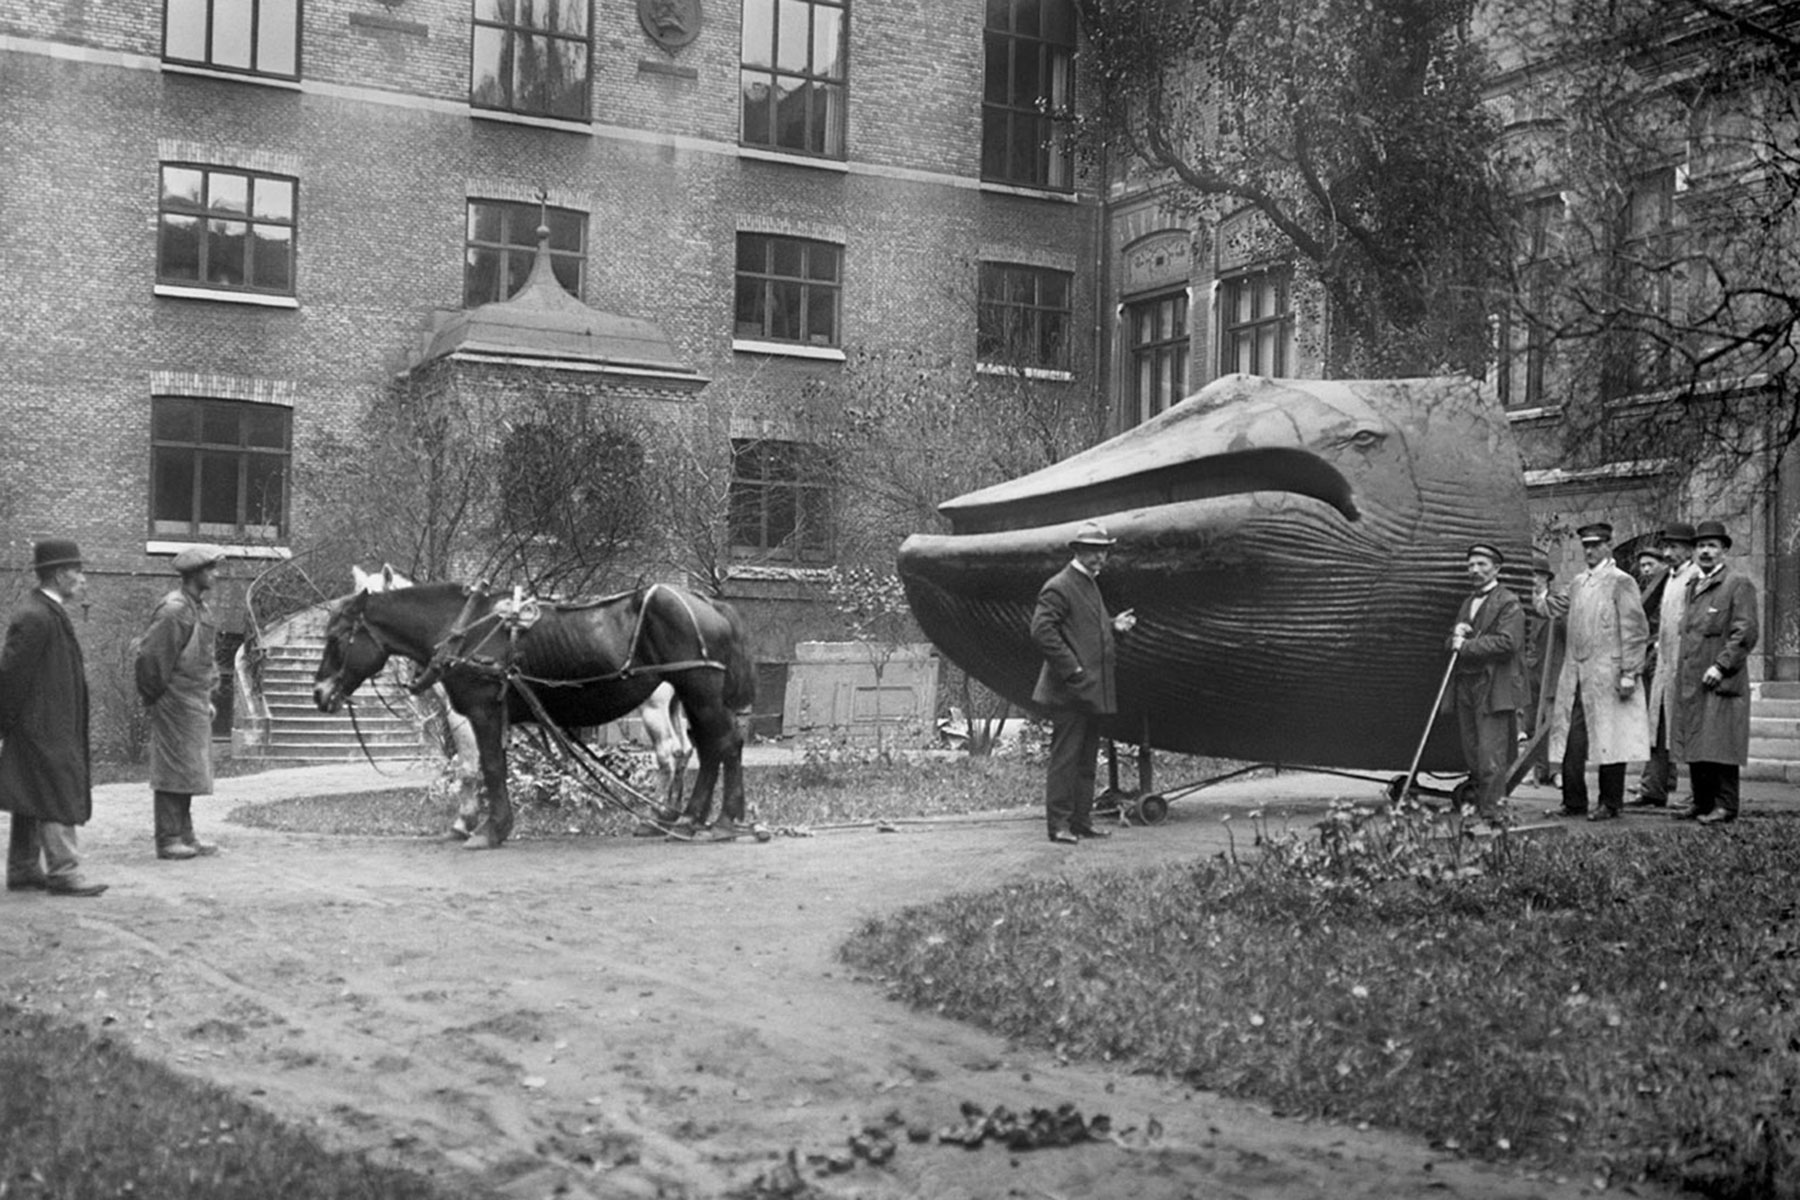 A 1918 photograph of the Malm Whale being moved from the Ostindiska Huset to its newly built premises at the Naturhistoriska Museet in Slottsskogen in Sweden.